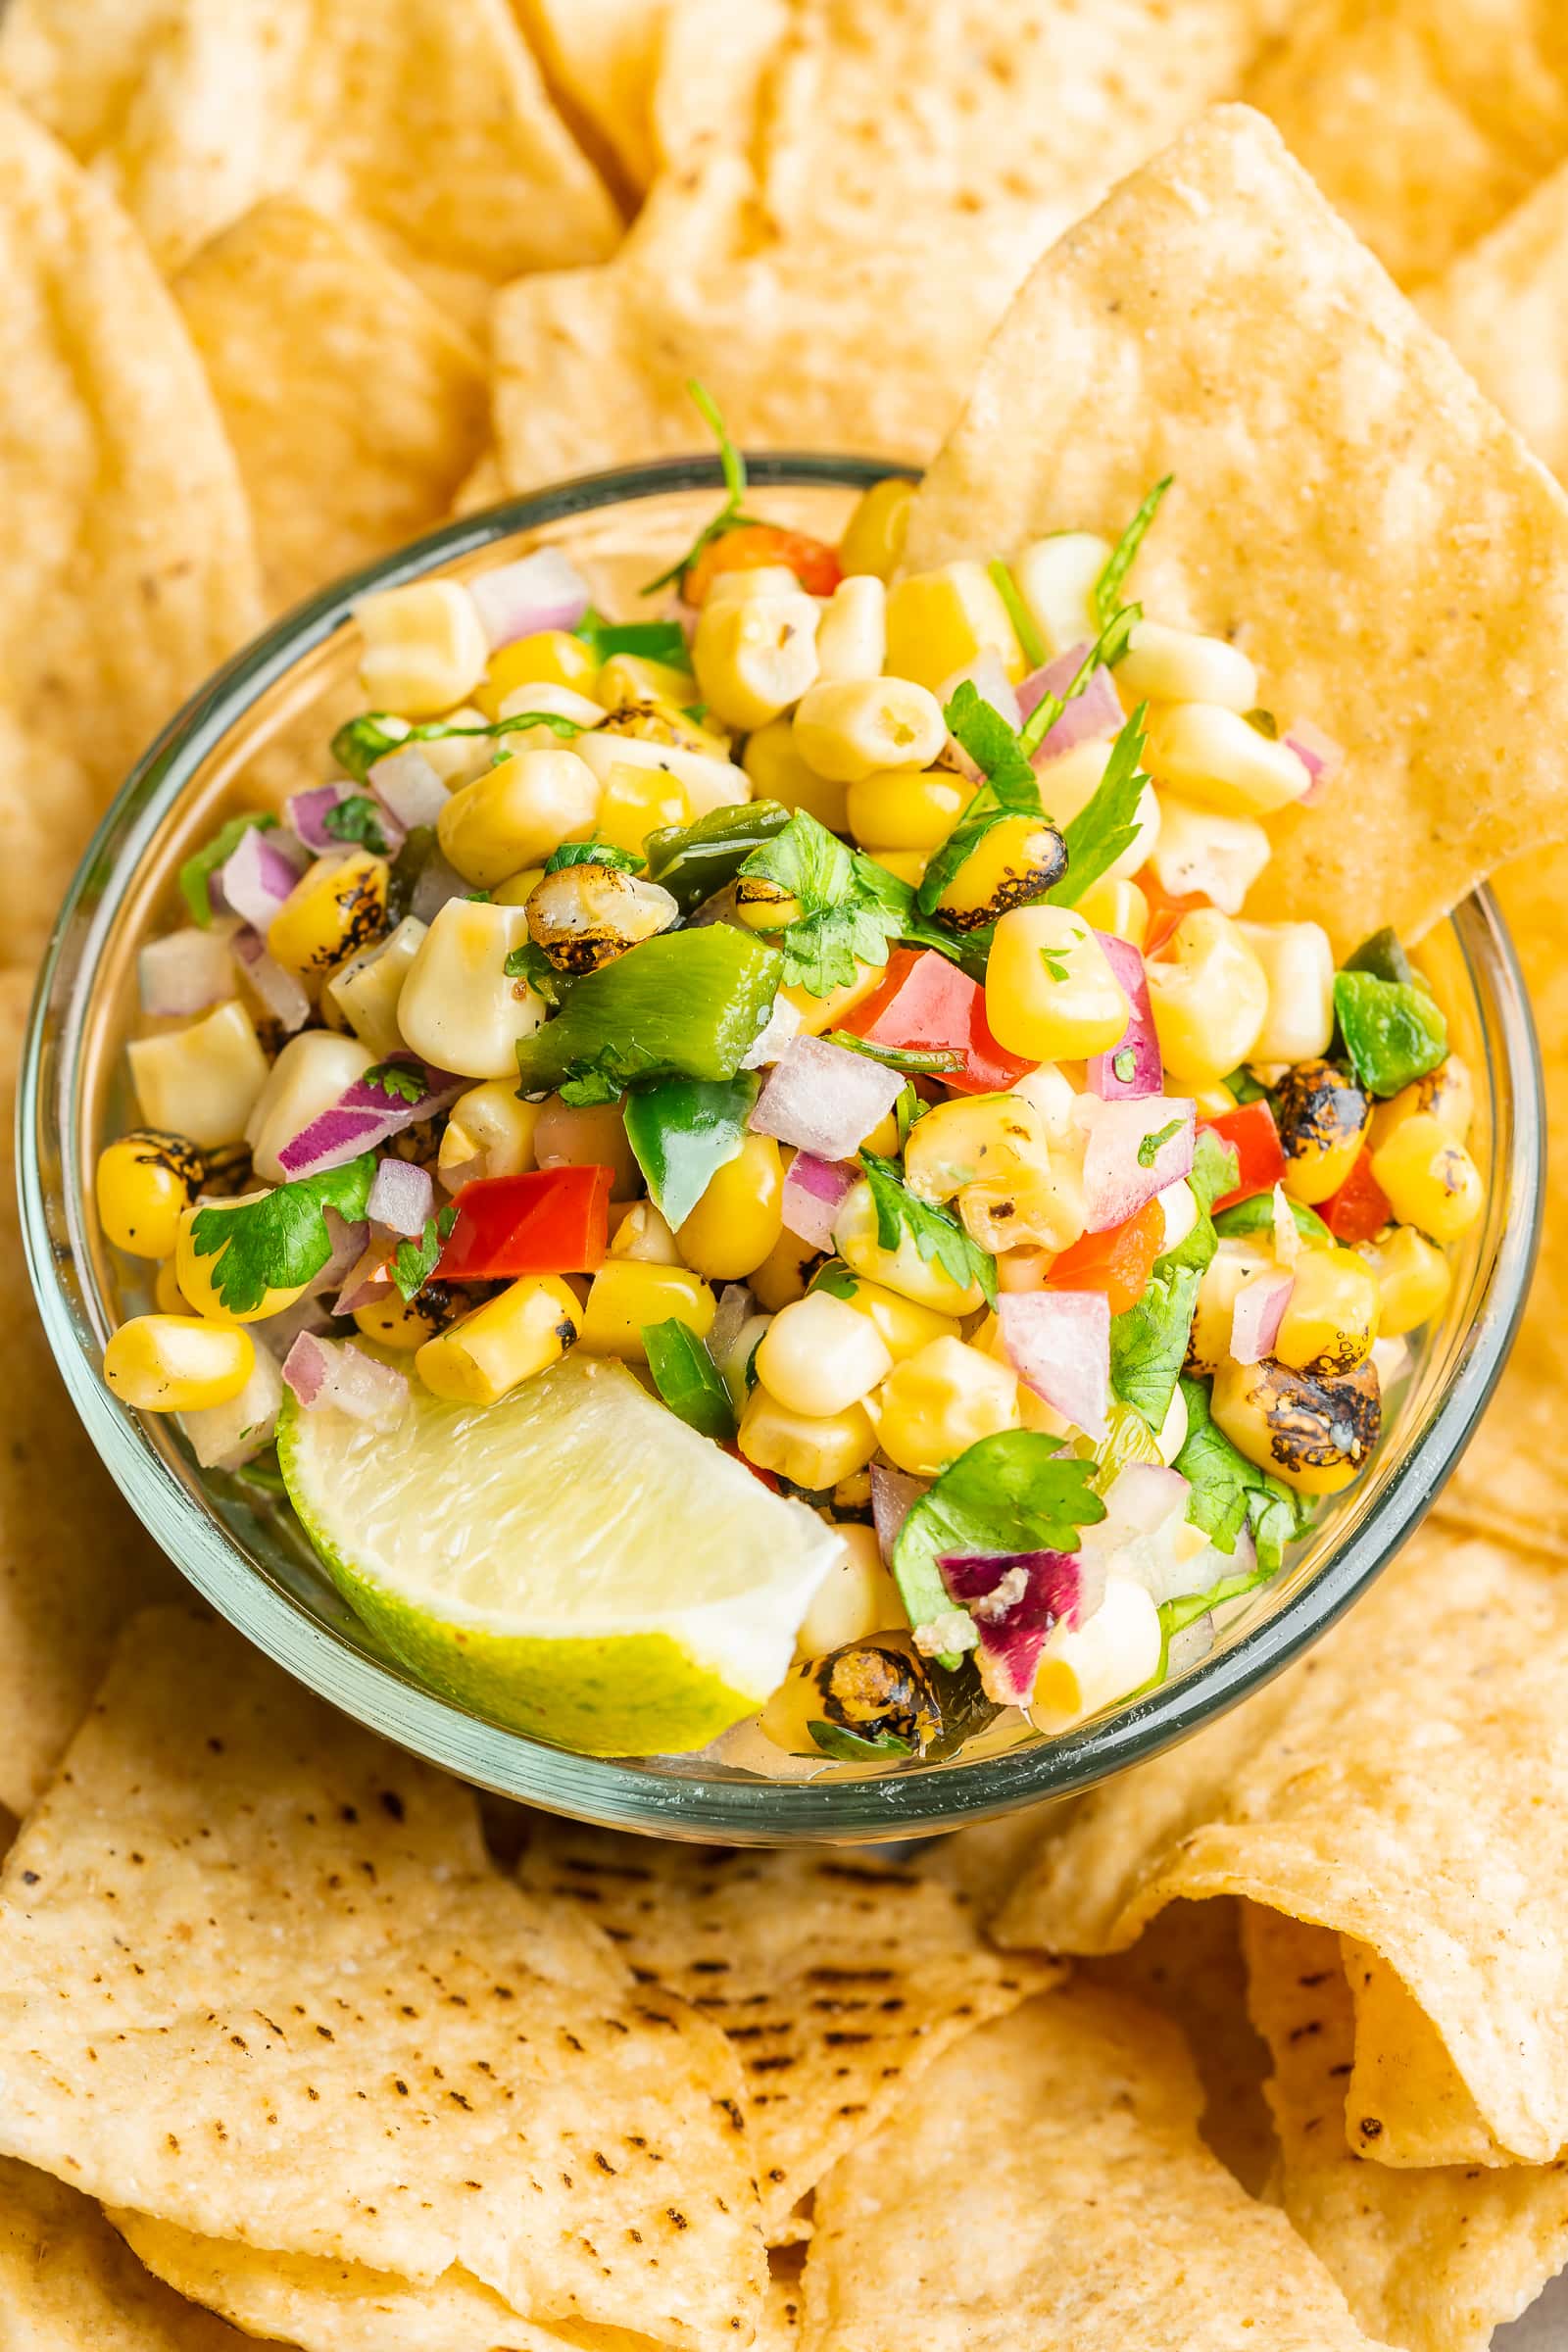 Corn salsa in a serving dish surrounded by tortilla chips.